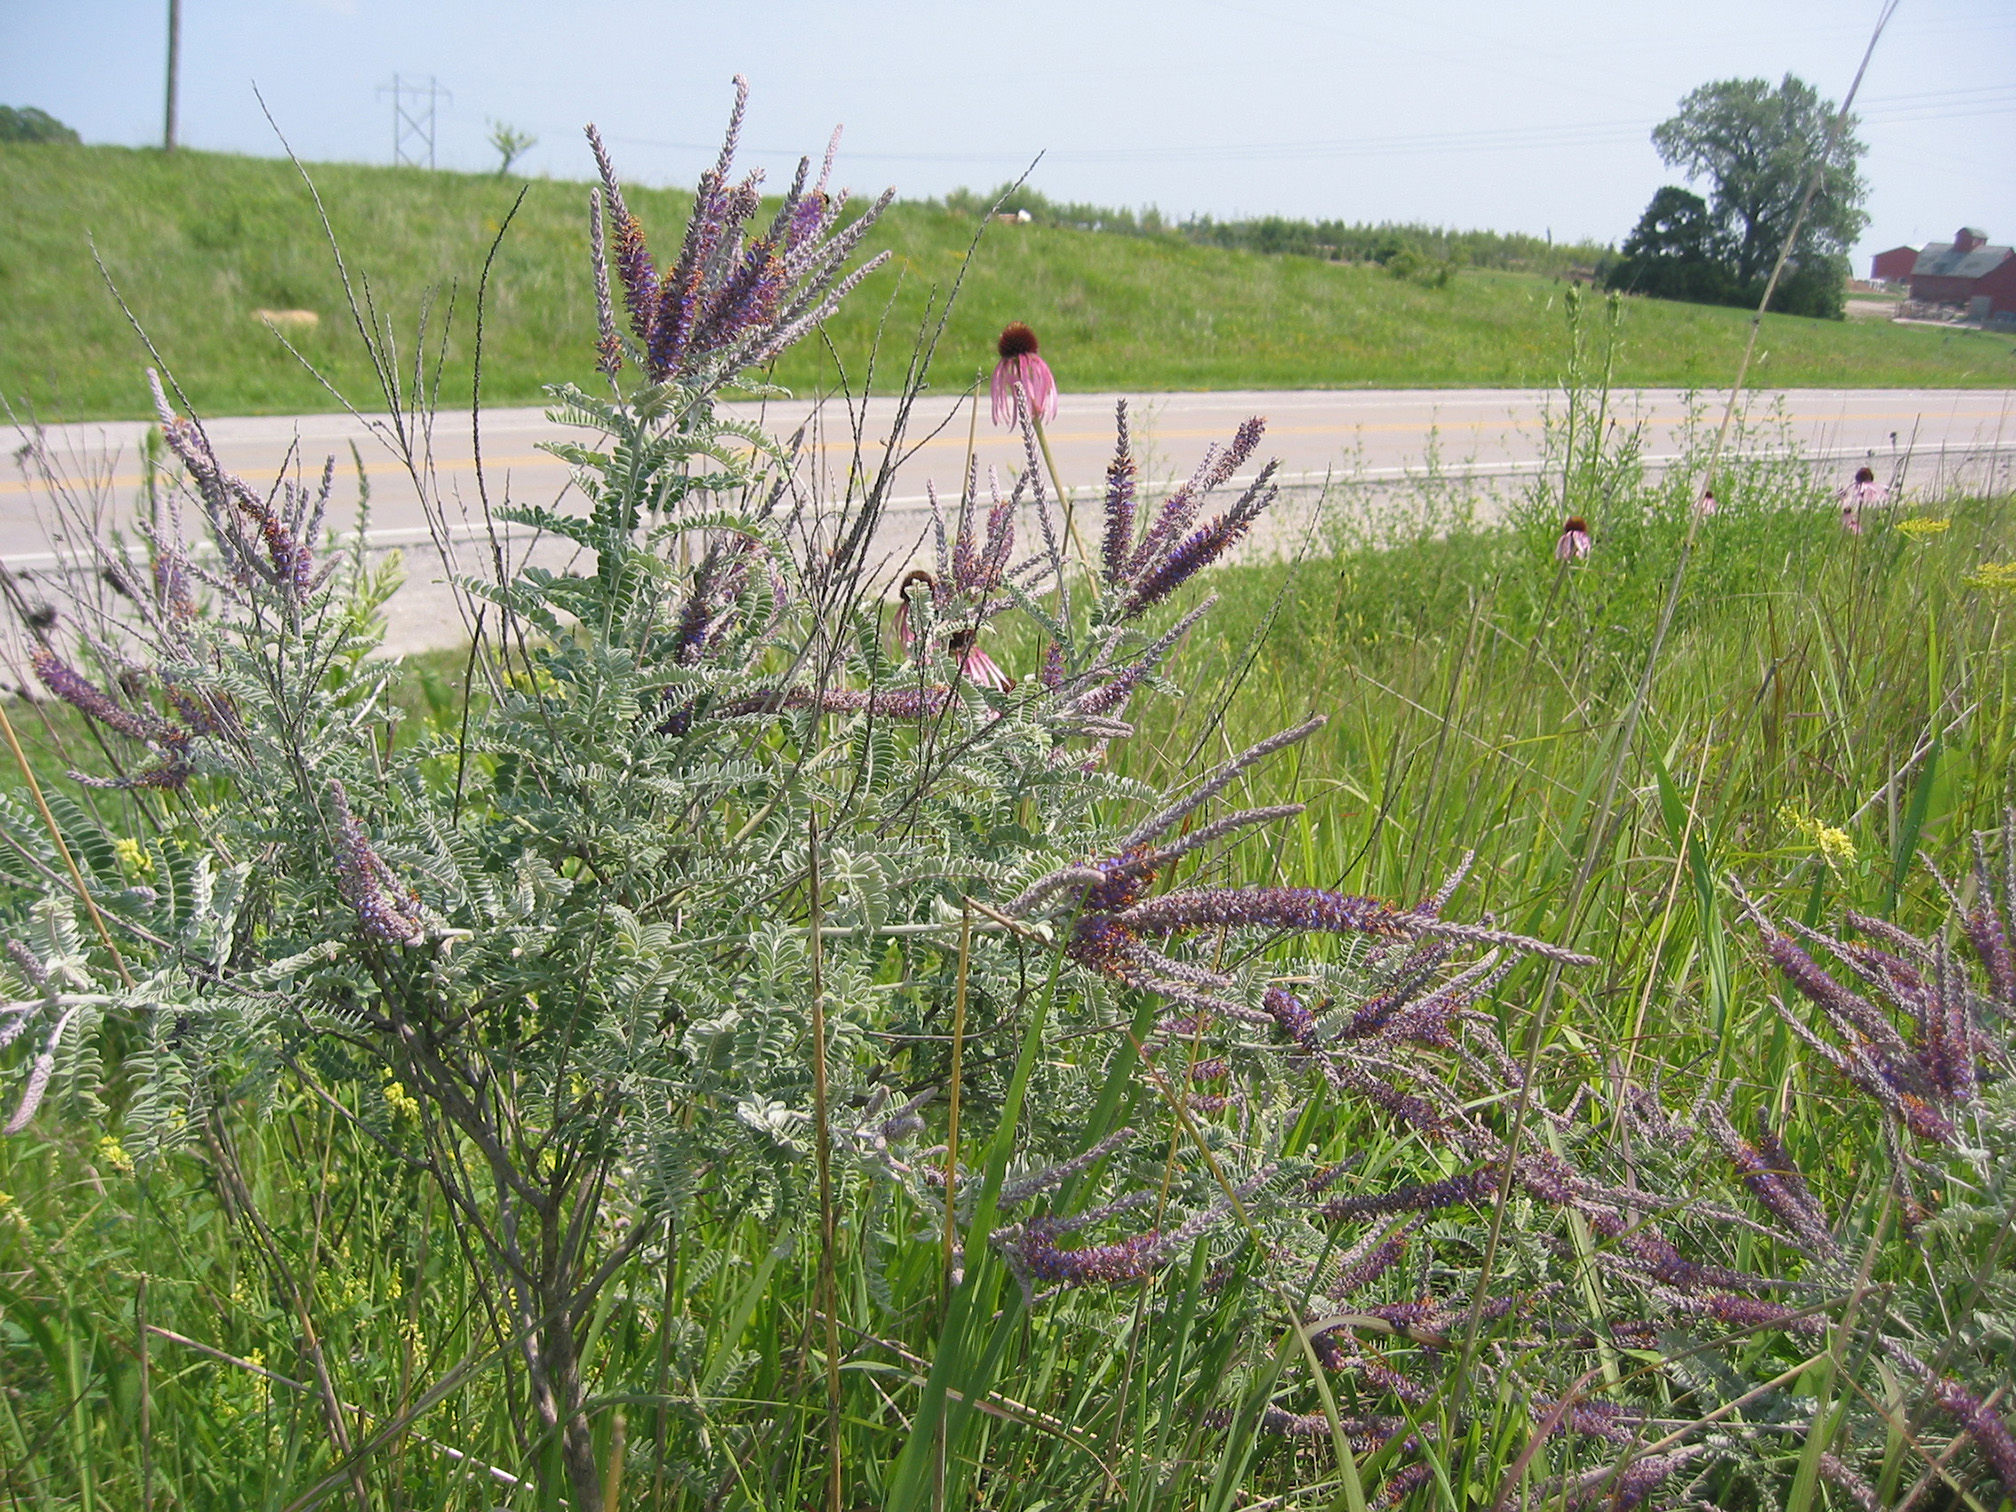 Wildflowers grow beside a quite rural road. The most abundant plant has small gray-green leaves that grow on horizontal branches and a clyster of long, narrow spikes of dark purple flowers at the top of the stem